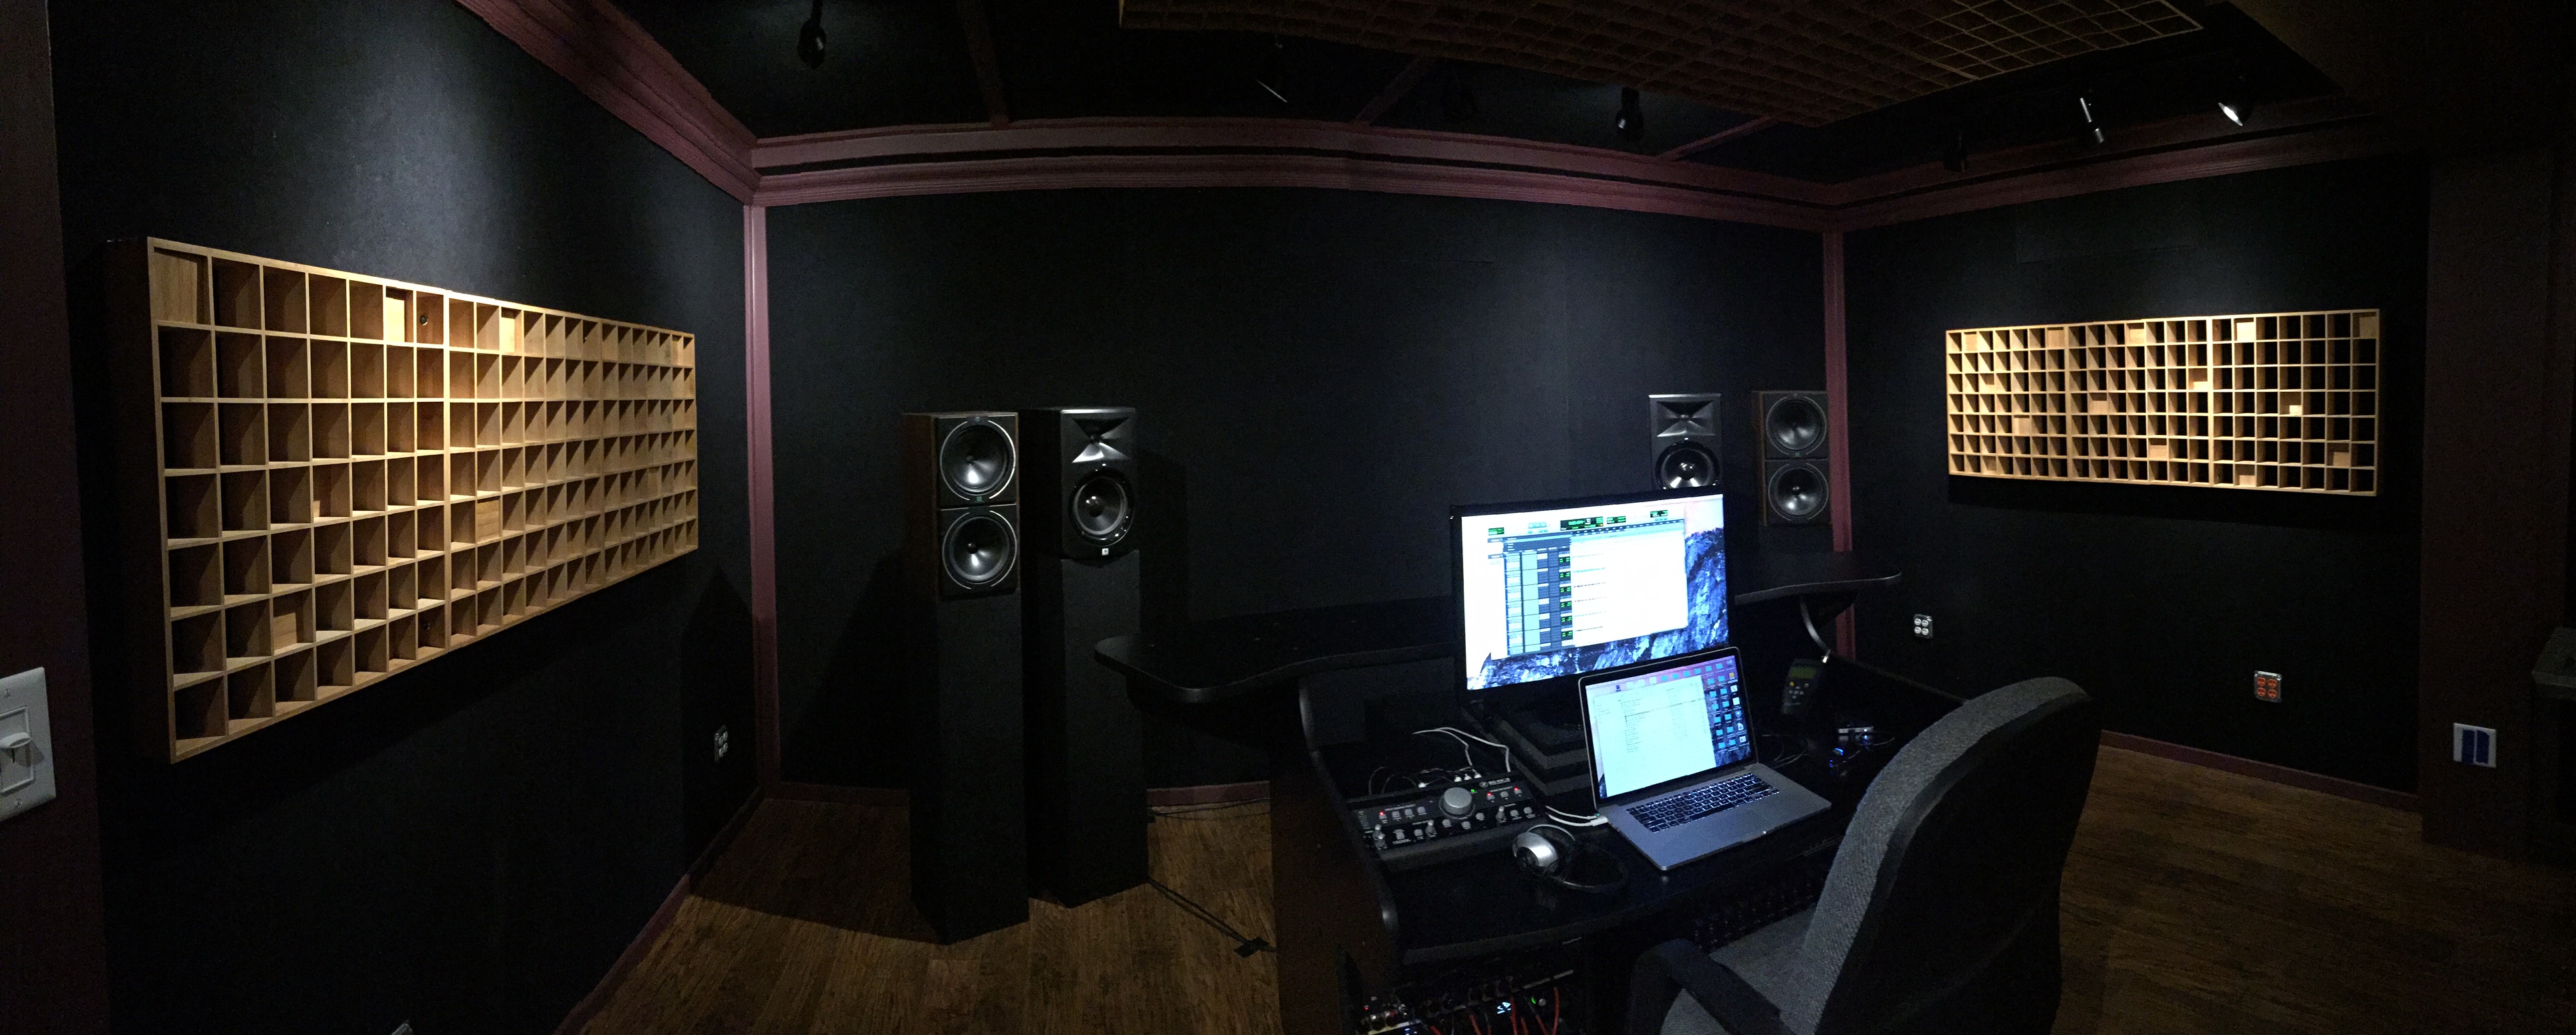 Wide angle photograph of the main control room.